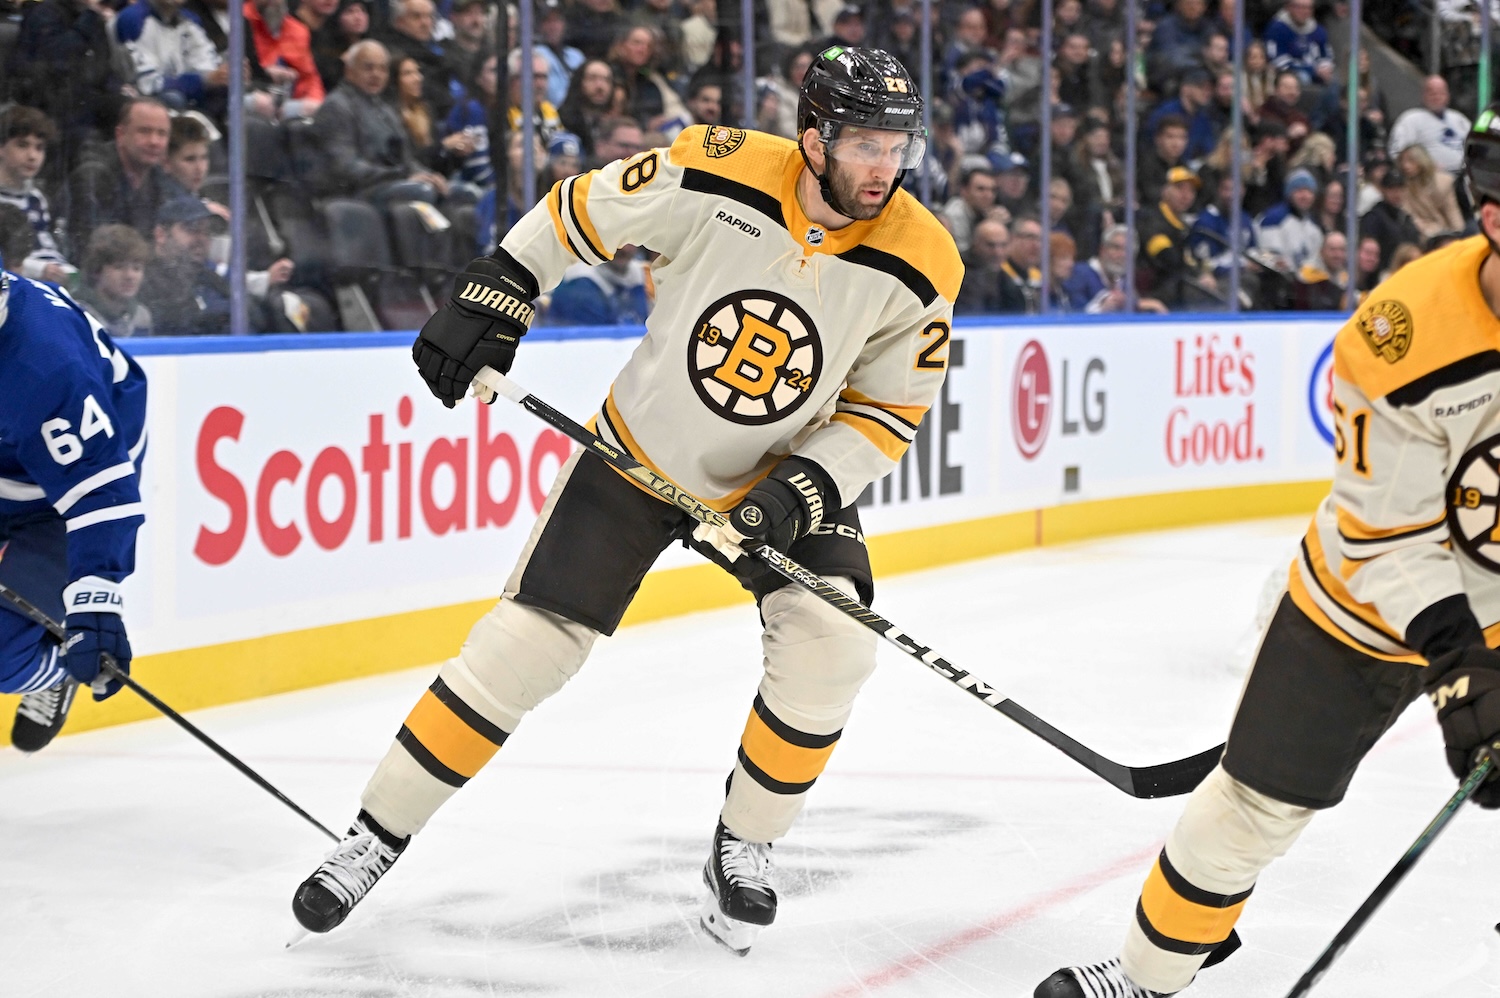 Dec 2, 2023; Toronto, Ontario, CAN; Boston Bruins defenseman Derek Forbort (28) pursues the play against the Toronto Maple Leaf in the first period at Scotiabank Arena. Mandatory Credit: Dan Hamilton-USA TODAY Sports